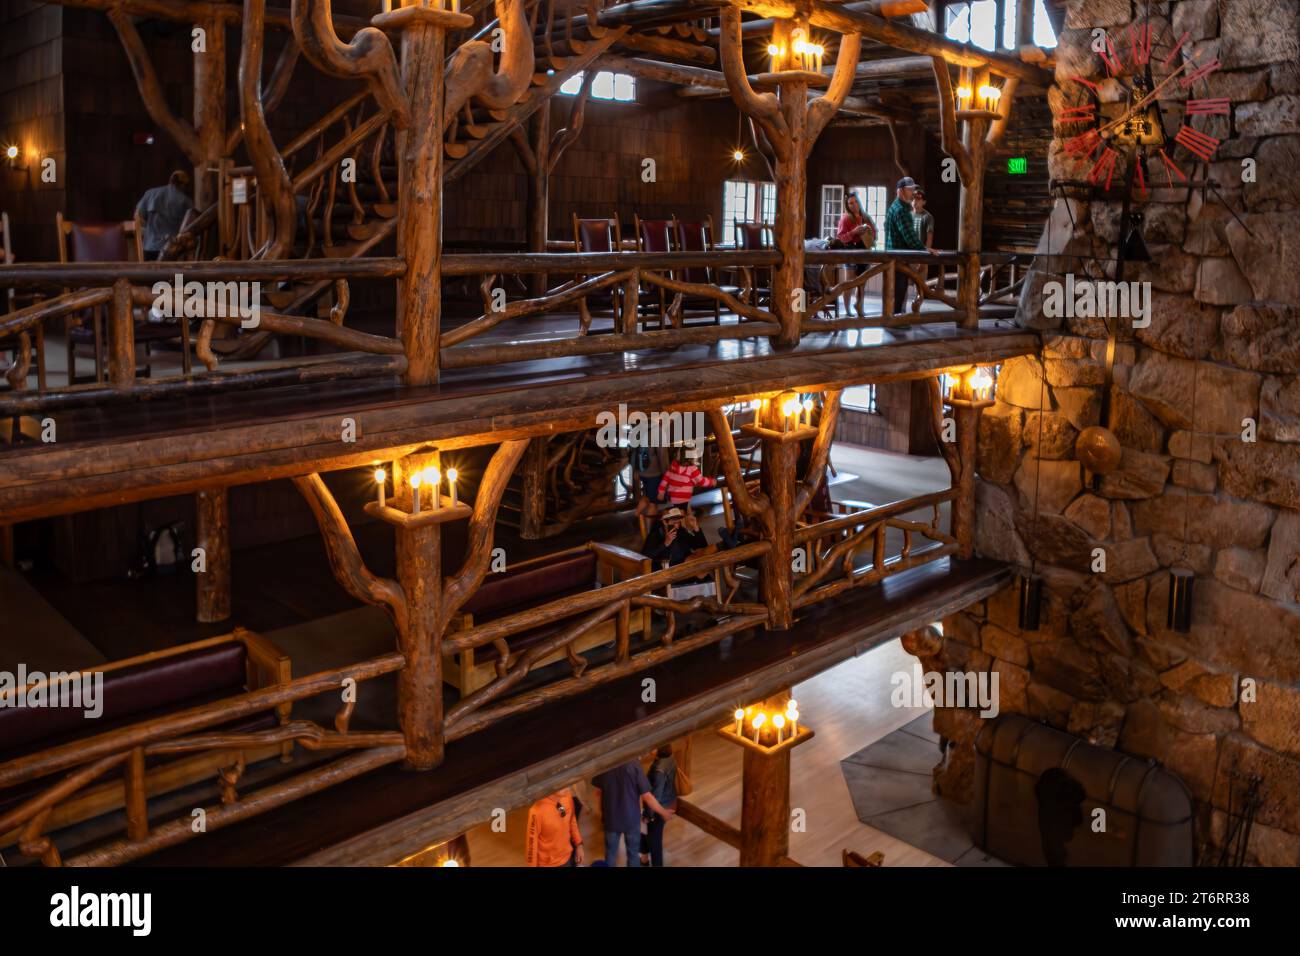 https://c8.alamy.com/comp/2T6RR38/wy05787-00wyoming-interior-of-the-old-faithful-lodge-in-yellowstone-national-park-photographed-with-a-lensbaby-velvet-28-2T6RR38.jpg